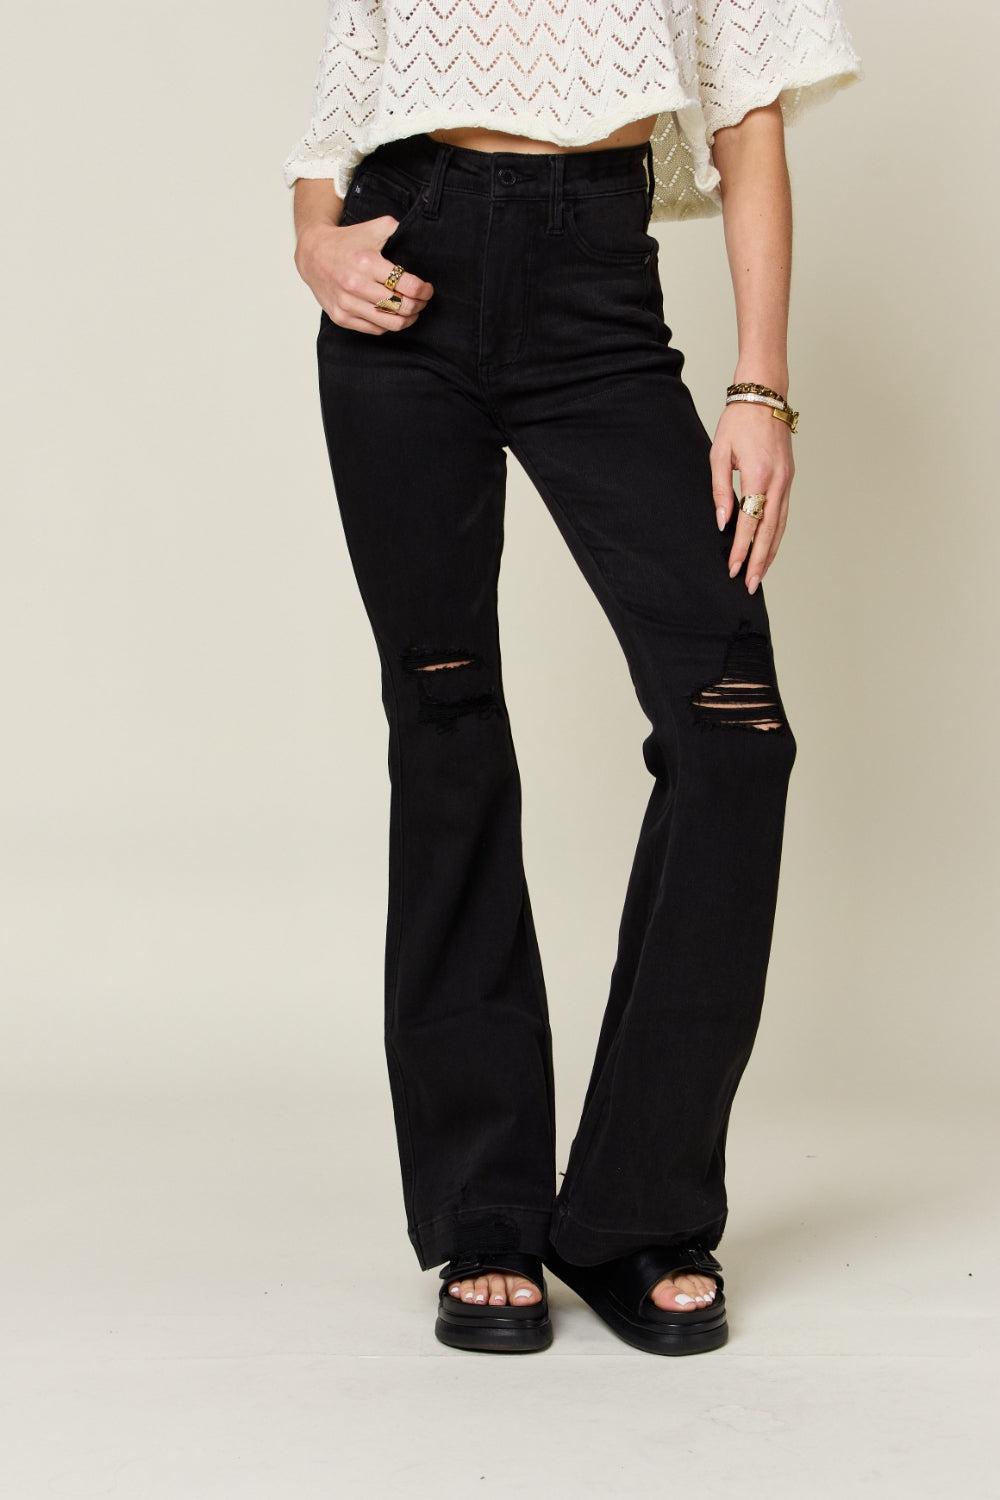 a woman wearing black jeans and a white top